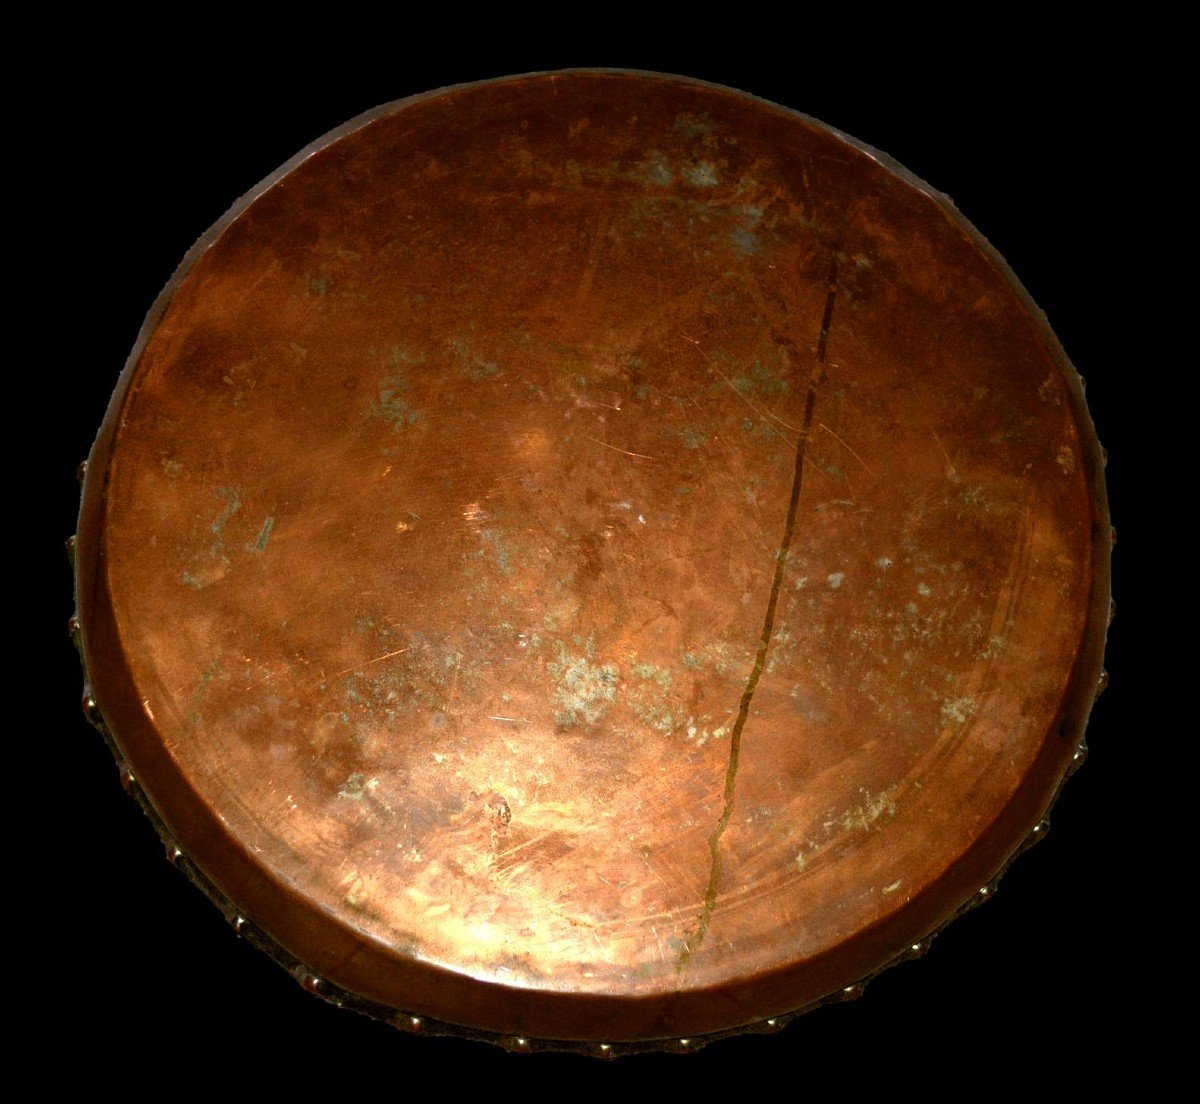 Oriental Tray With Floral Decoration Engraved With A Chisel, Red Copper, Turkey From The 19th Century-photo-1